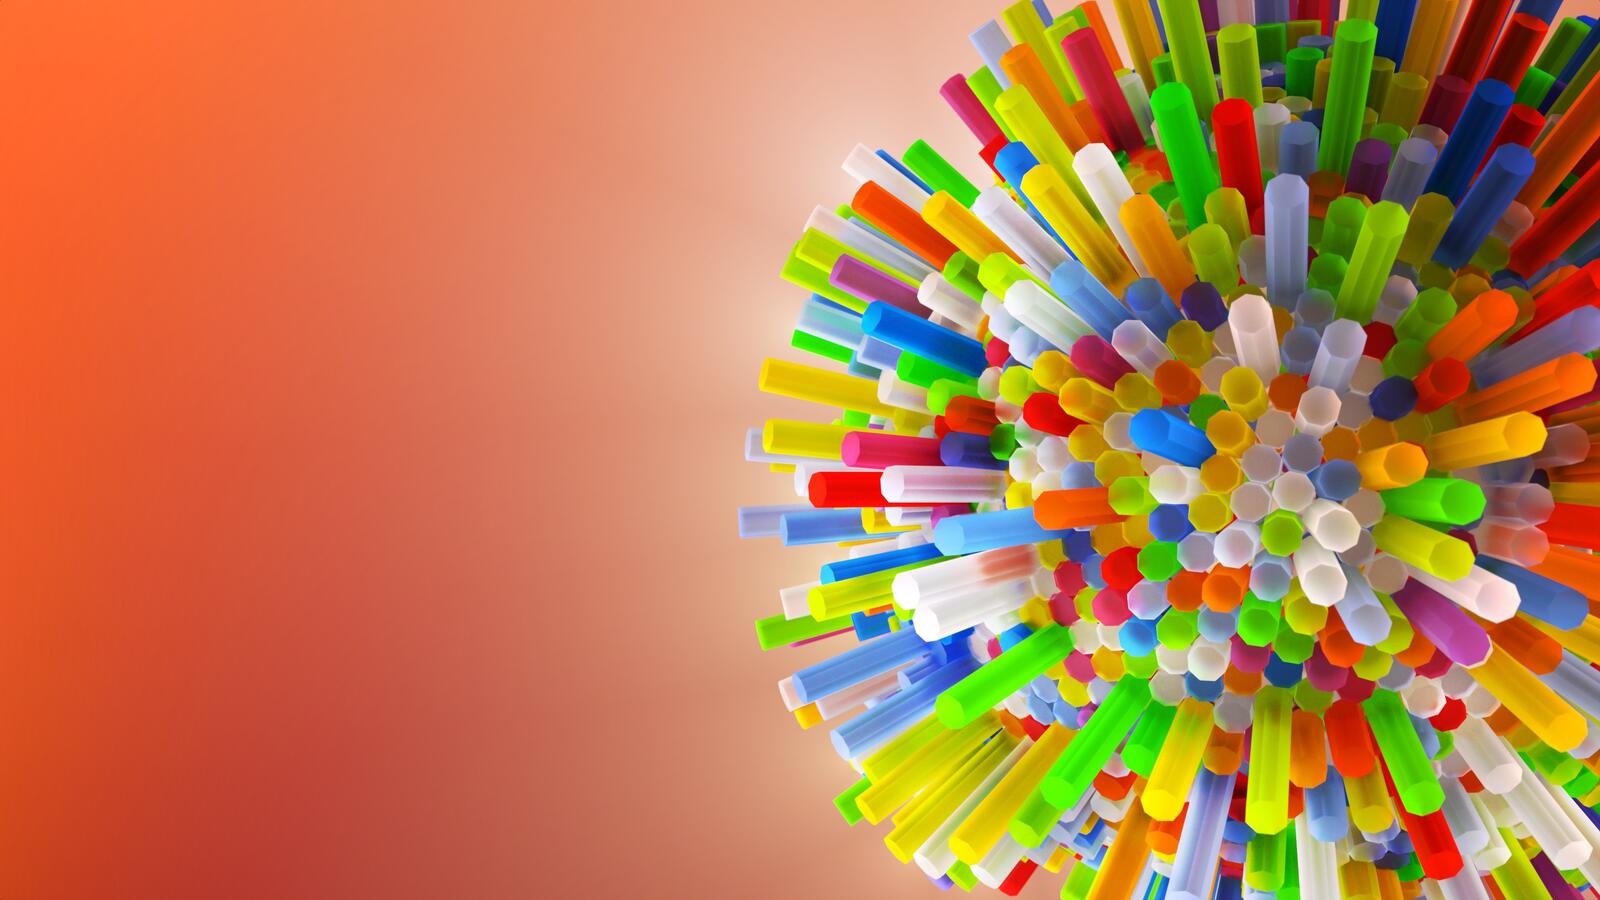 Wallpapers view from the top wallpaper colorful straws background on the desktop